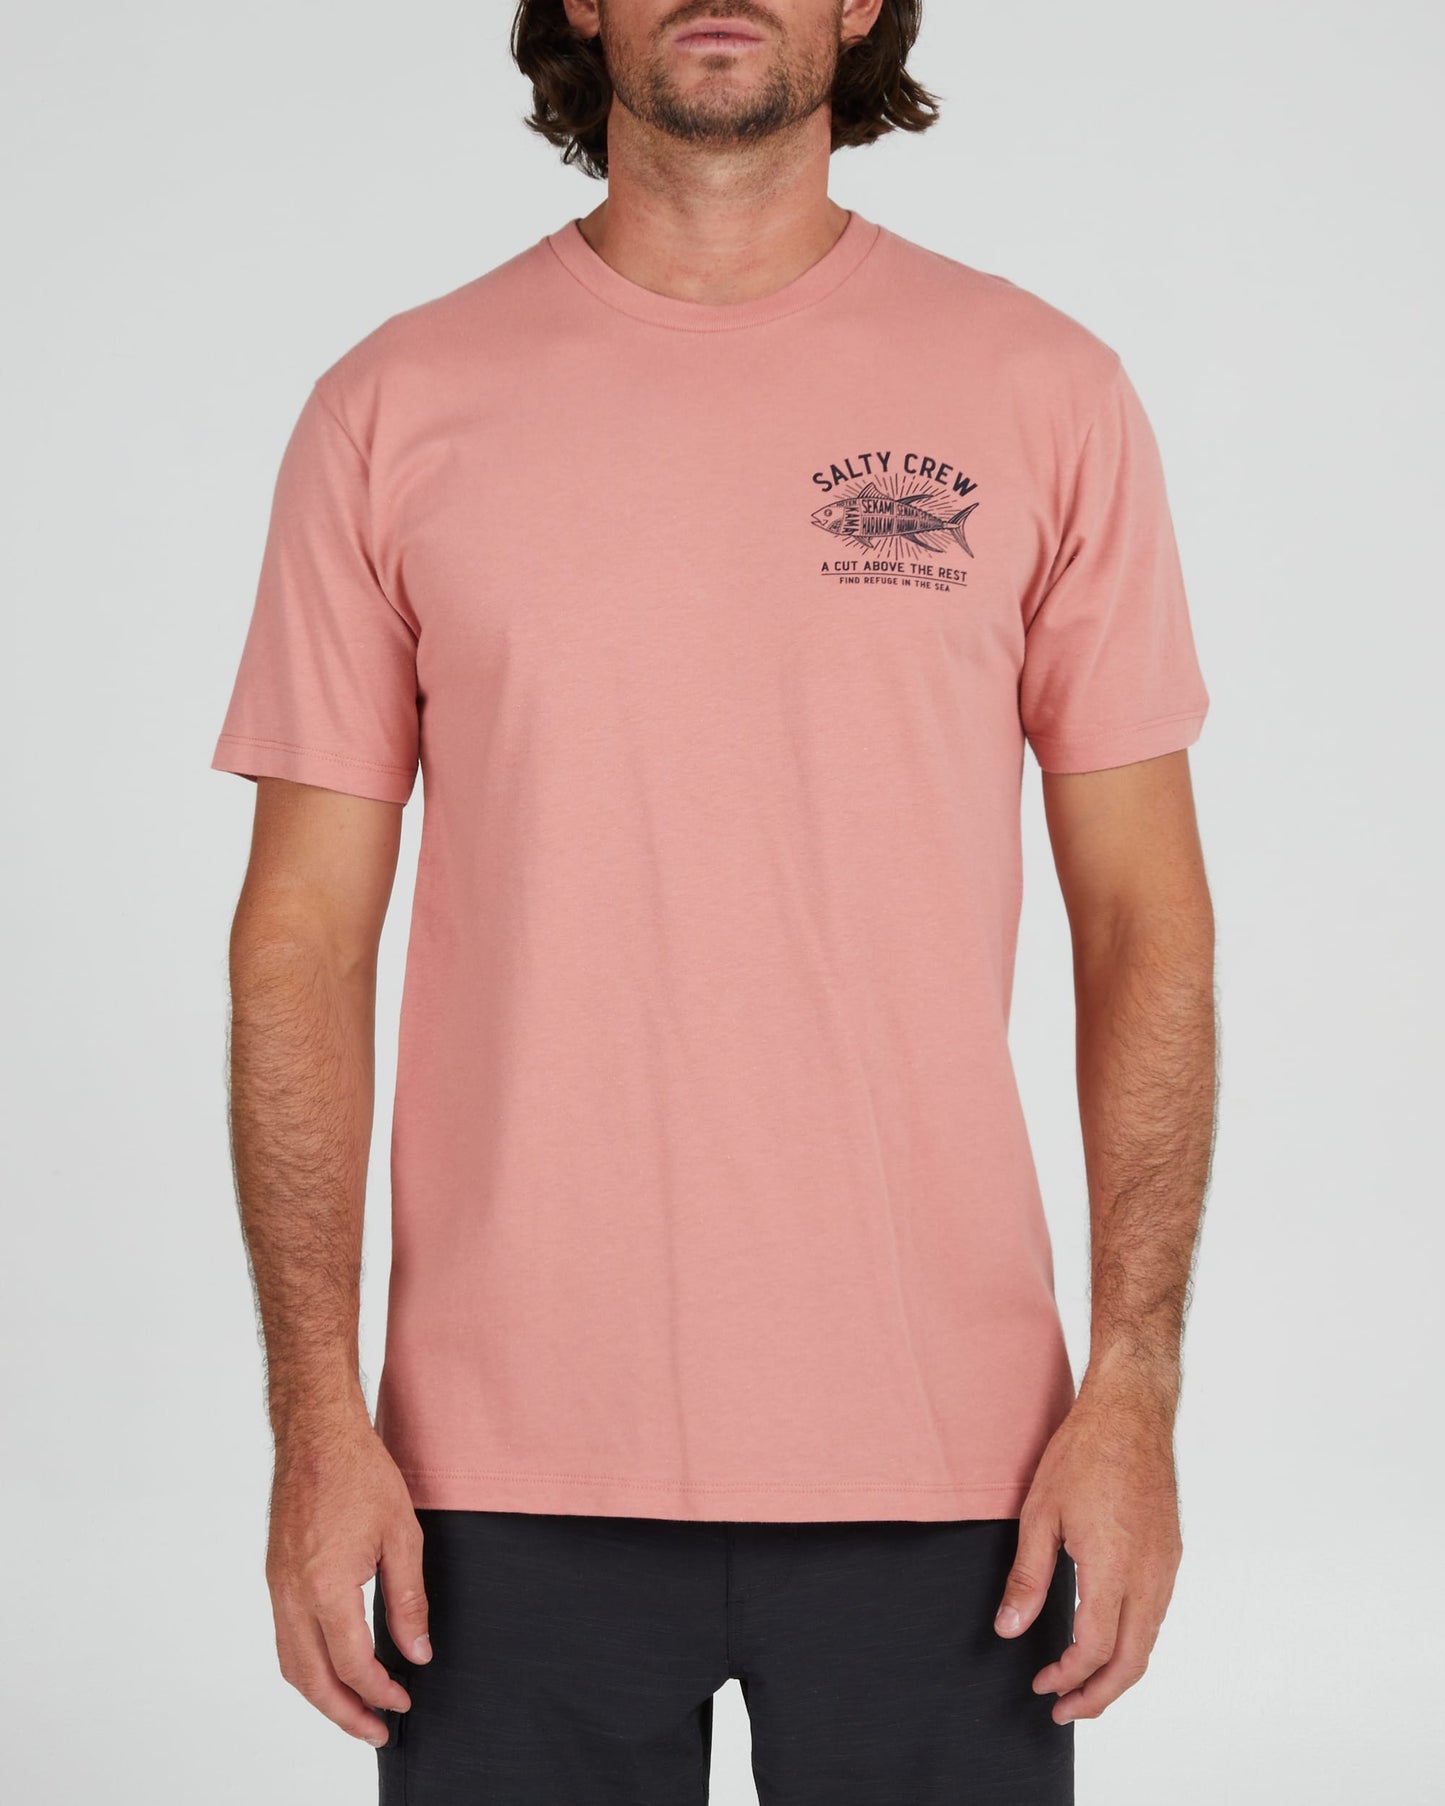 Salty crew T-SHIRTS S/S CUT ABOVE PREMIUM S/S TEE - Coral in Coral